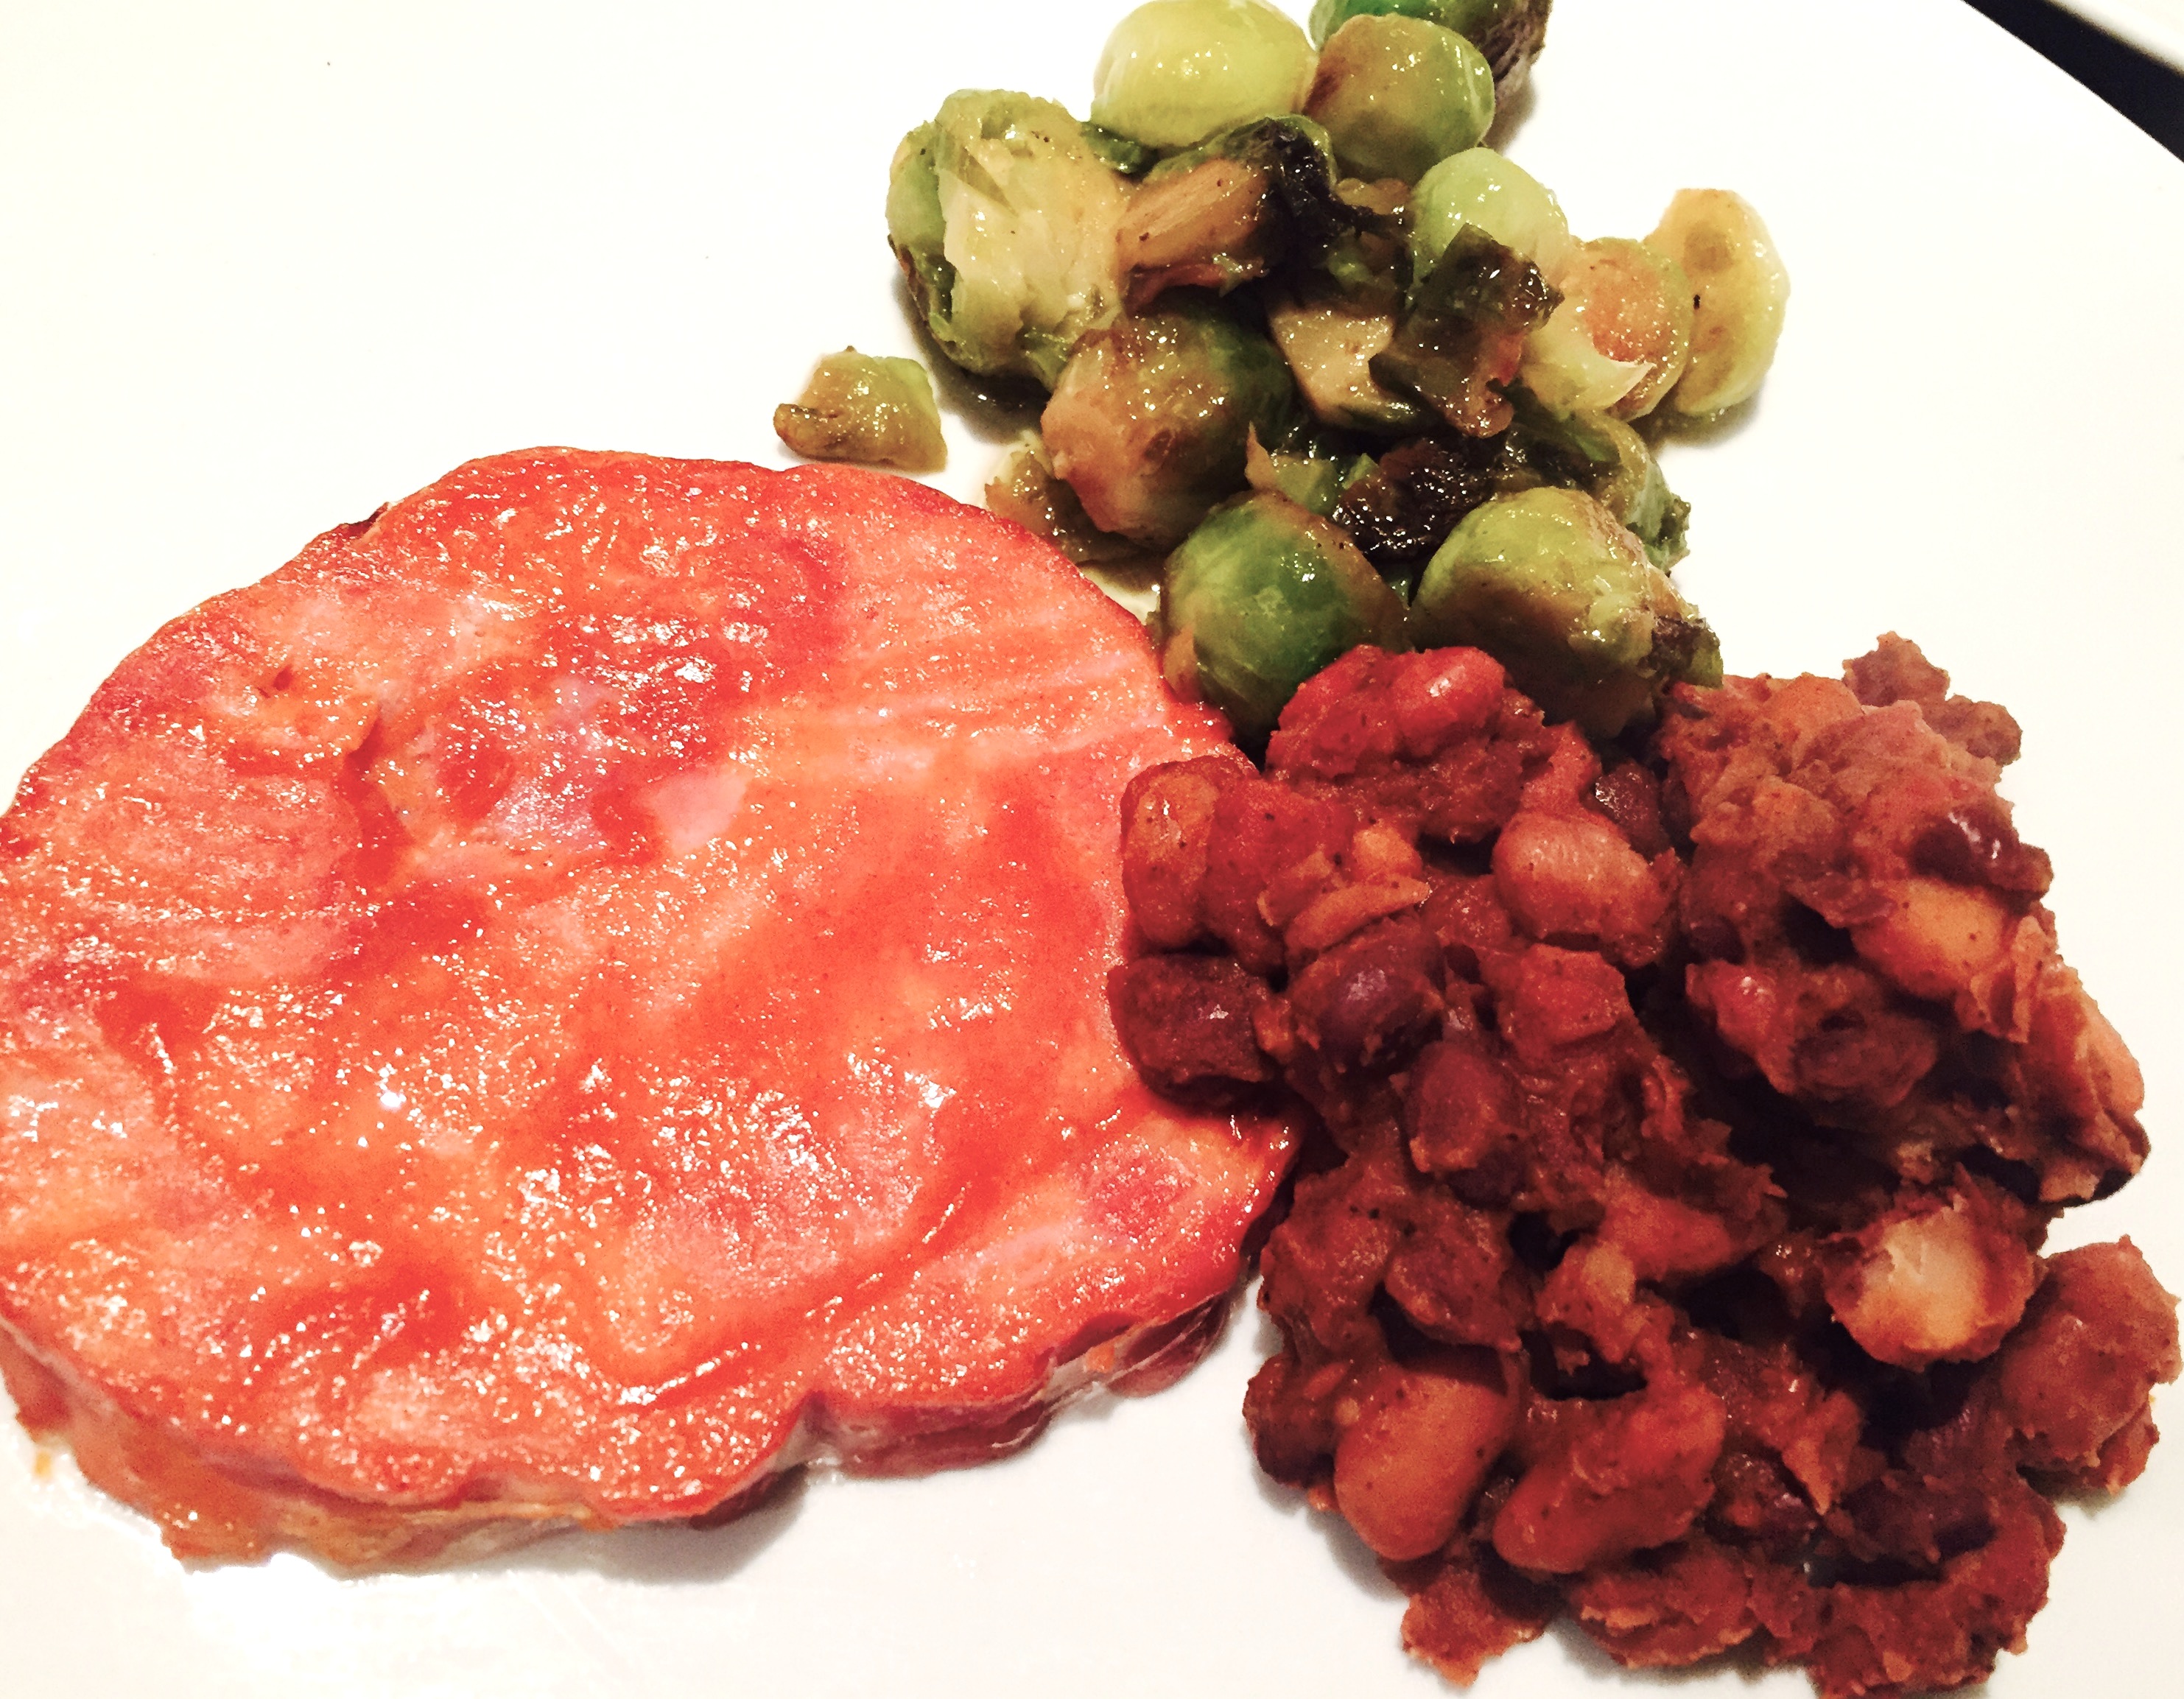 Broiled Ham Steaks with Stovetop Chilli and Sauteed Brussel Sprouts